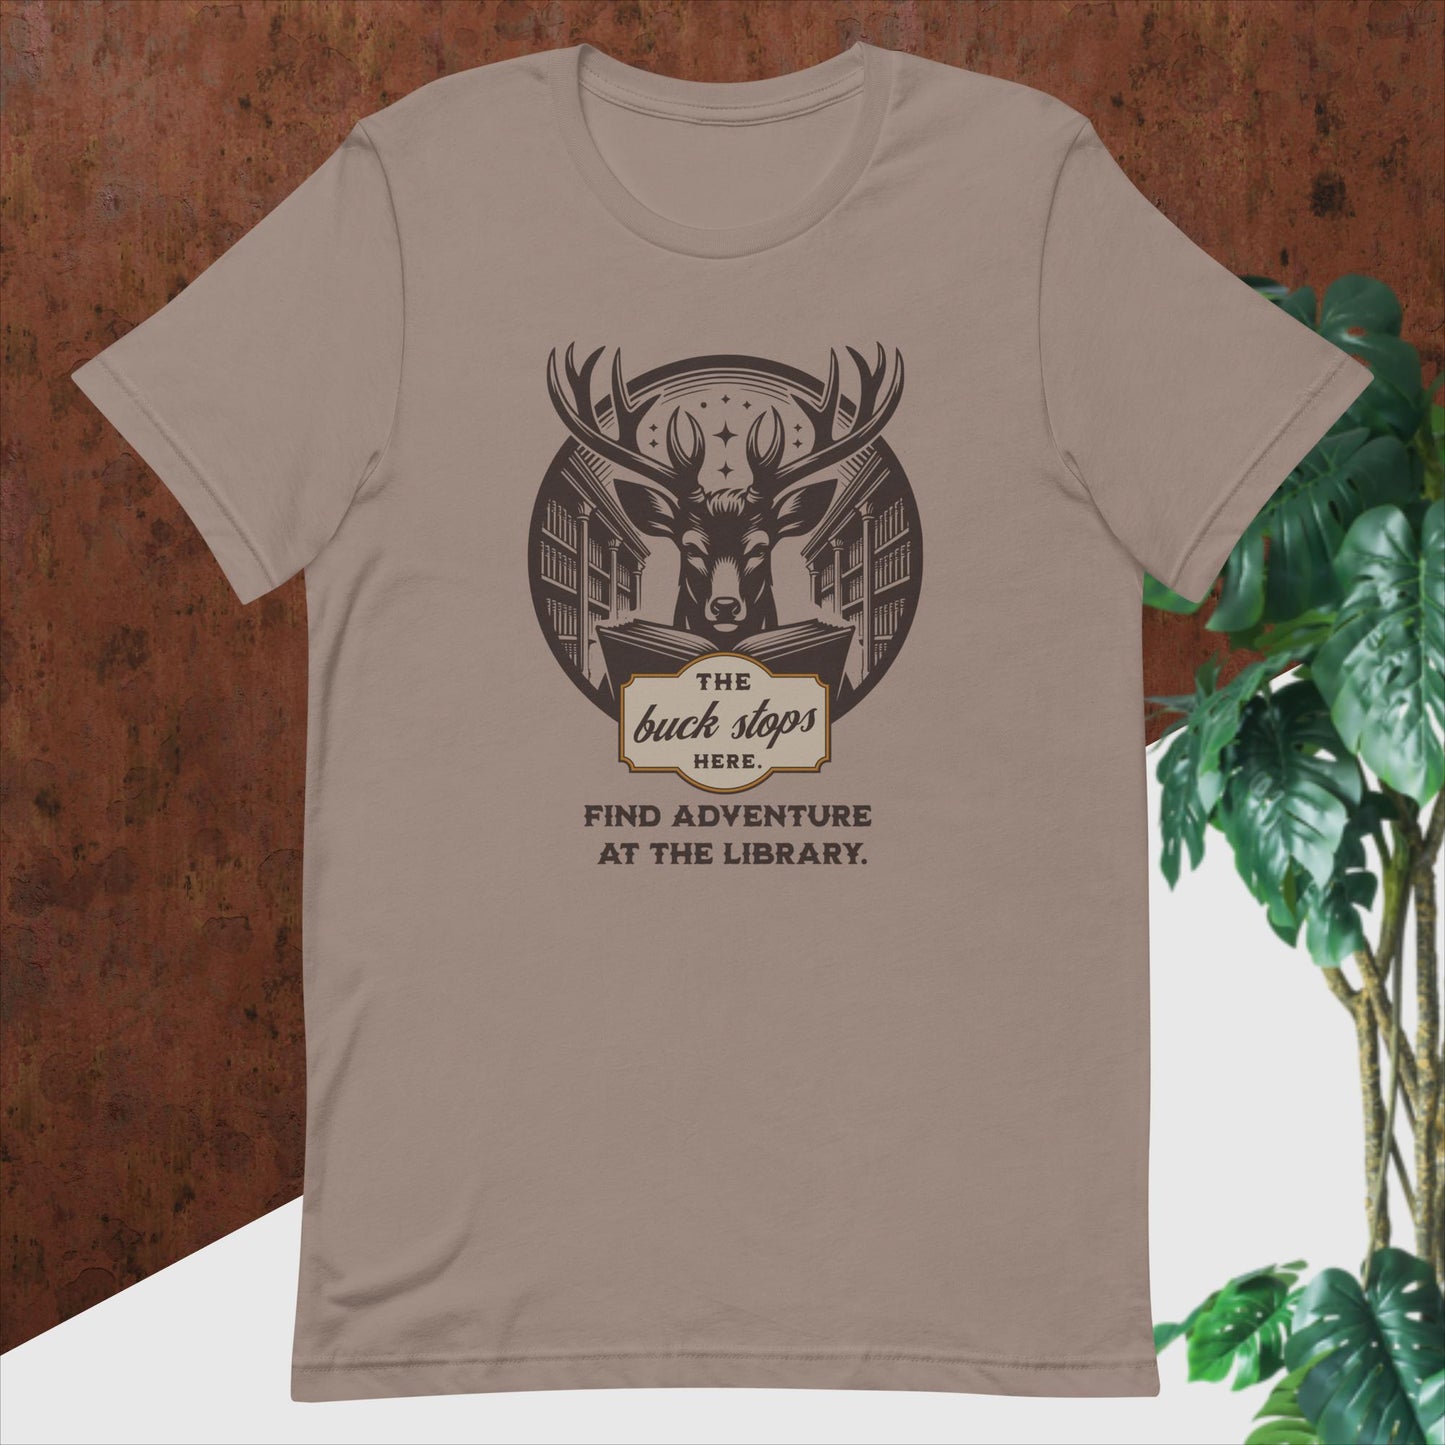 ADULT "Buck Stops Here" (at the Library) Library Worker Librarian Media Specialist Summer Reading "Adventure Begins at the Library"T-Shirt Gift Tshirt